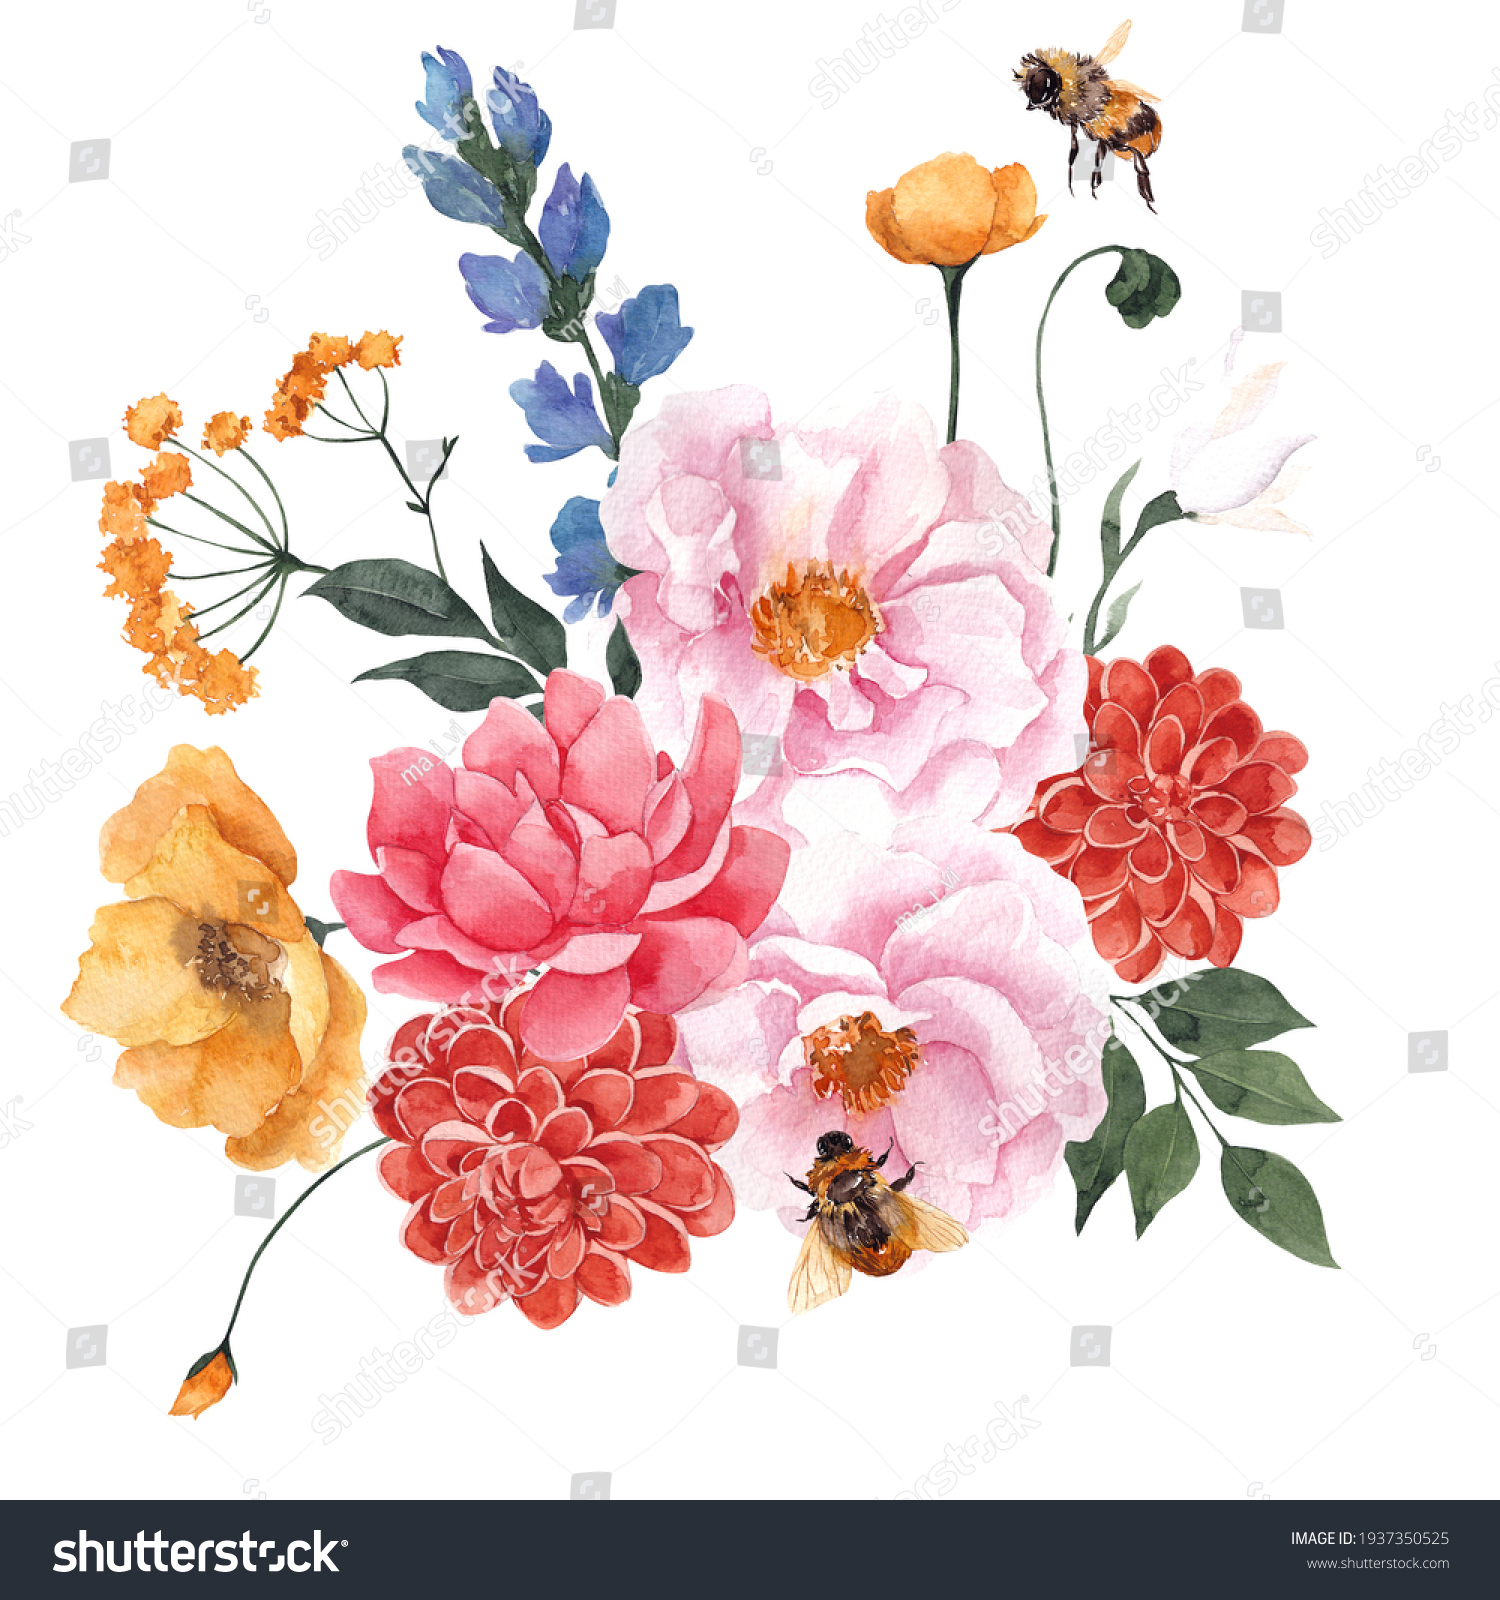 Watercolor Bouquet Wildflowers Herbs Leaves Isolated 库存插图 1937350525 Shutterstock 5279